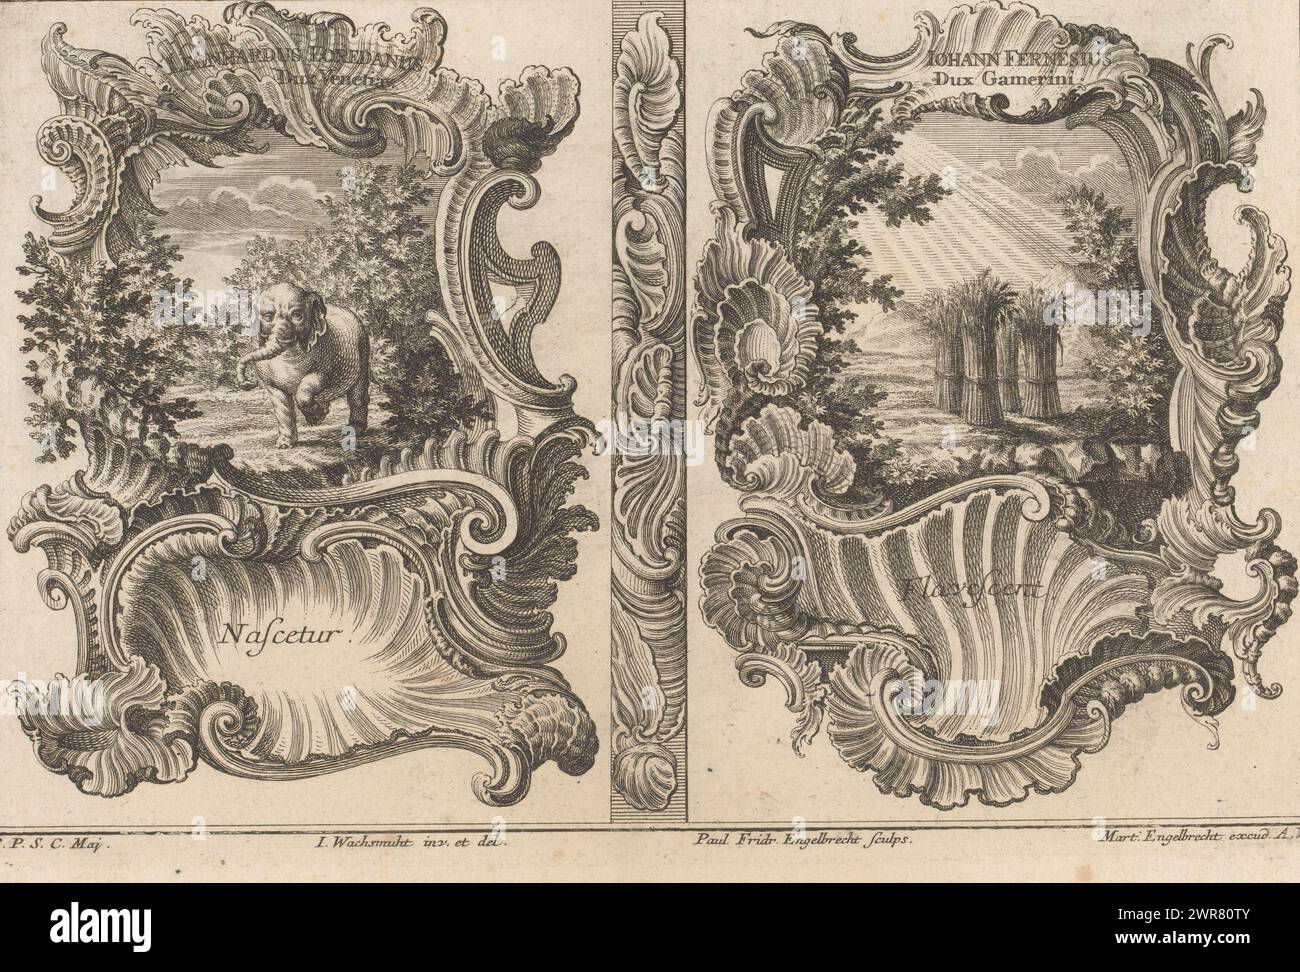 Leonardo Loredano and Johannes Farnese, Symbolic representations of historical figures (series title), Two rocaille frames. On the left an elephant in a forest landscape. Above and below the scene the texts Leonhardus Loredanus Dux Venetiae, Nascetur. On the right four sheaves of wheat in sunbeams. Above and below the performance the texts Iohann Fernesius Dux Gamerini, Flavescent., print maker: Paul Friedrich Engelbrecht, after design by: Jeremias Wachsmuth, publisher: Martin Engelbrecht, Augsburg, 1729 - 1756, paper, etching, height 193 mm × width 302 mm Stock Photo